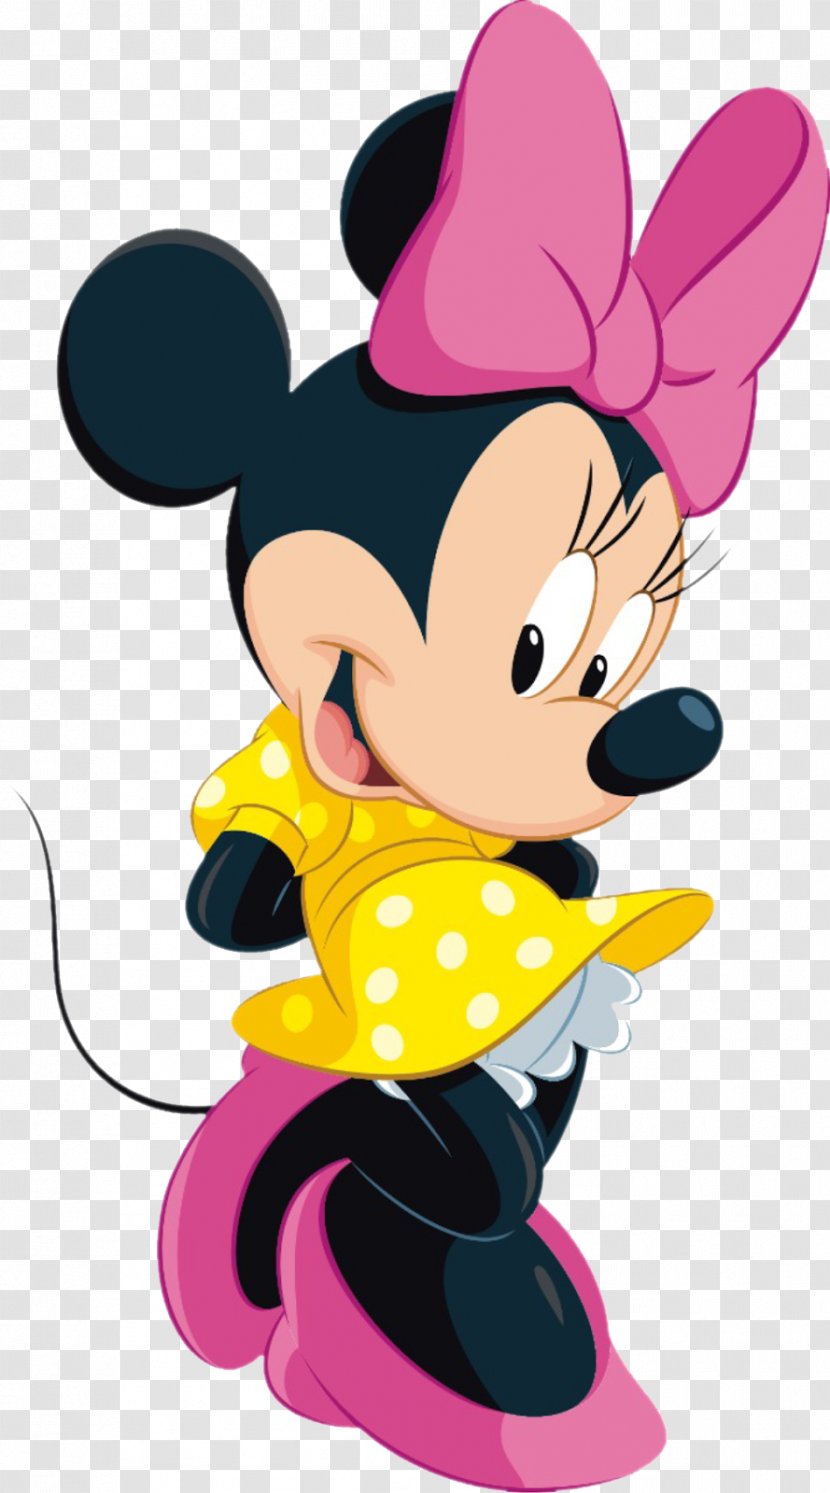 Minnie Mouse Mickey Daisy Duck - Fictional Character - Fundo Transparent PNG